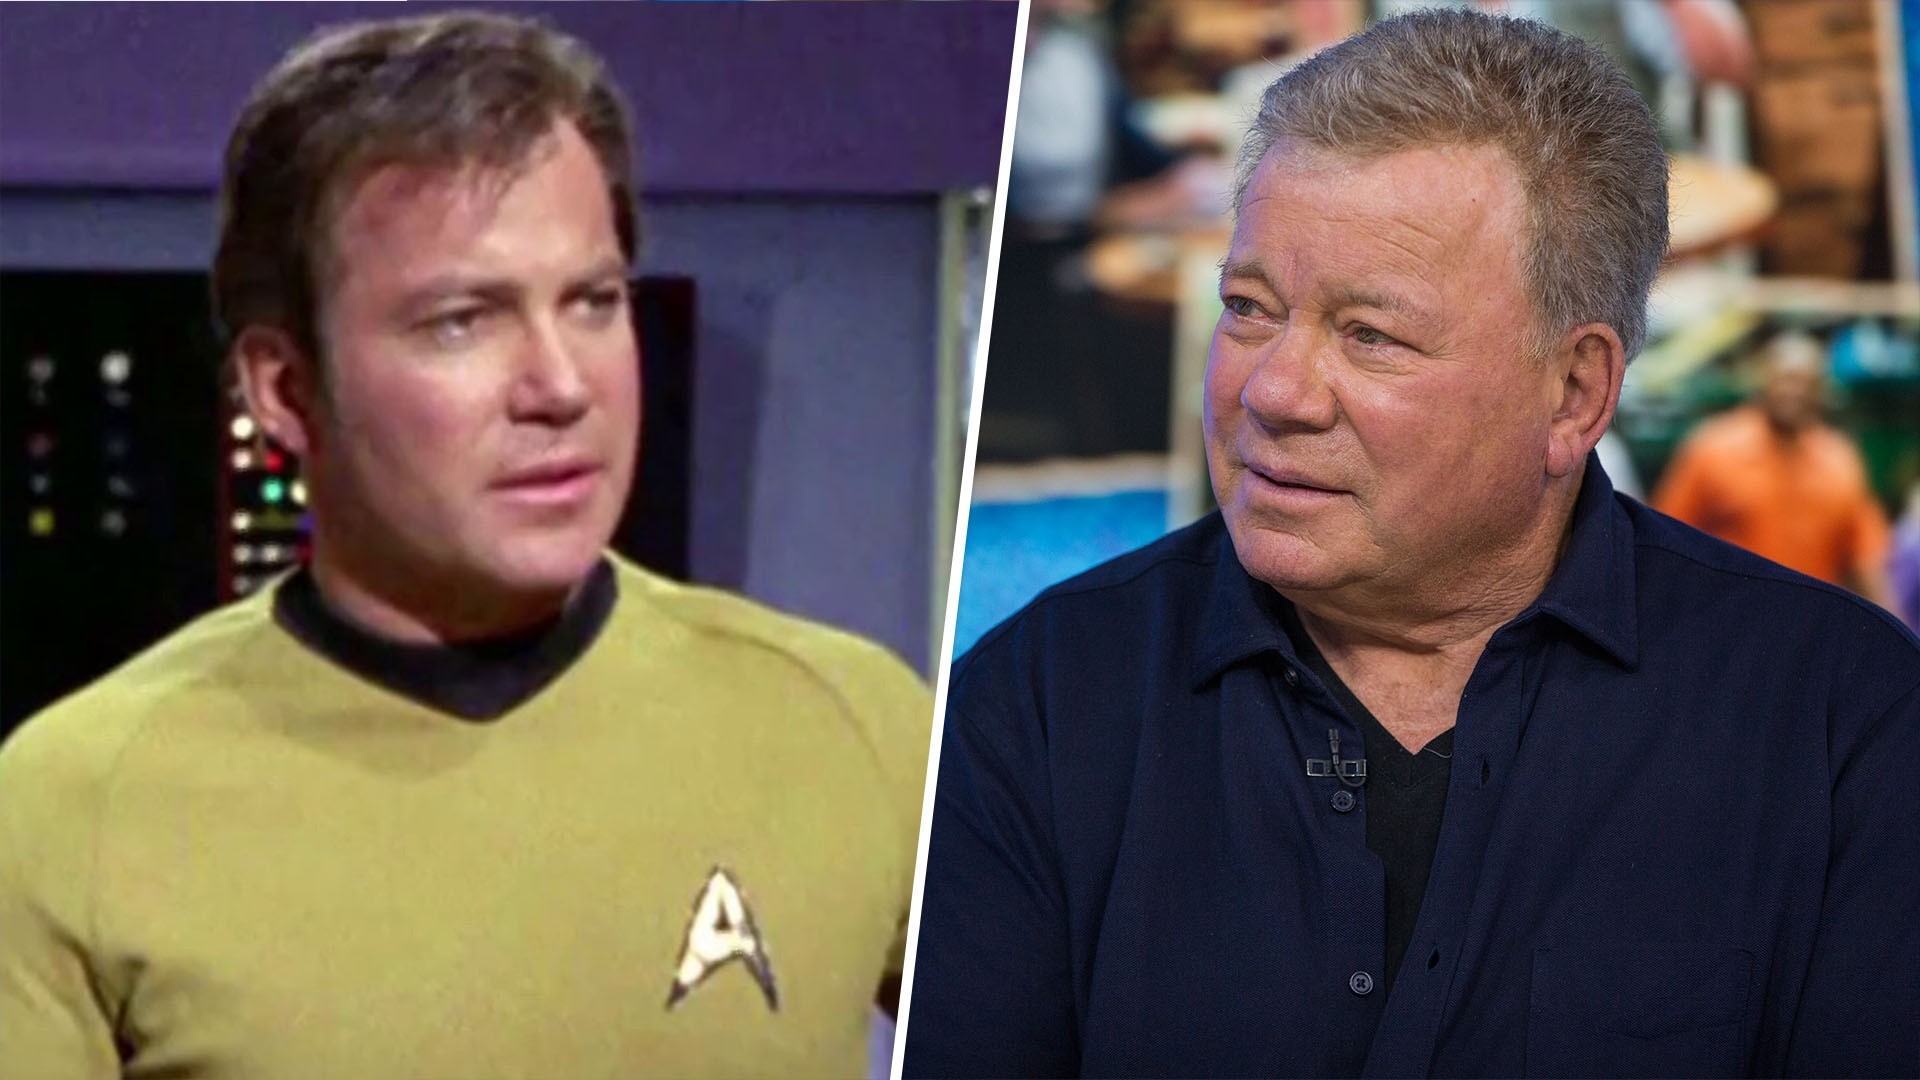 Actor William Shatner on going to space: 'I'm terrified'